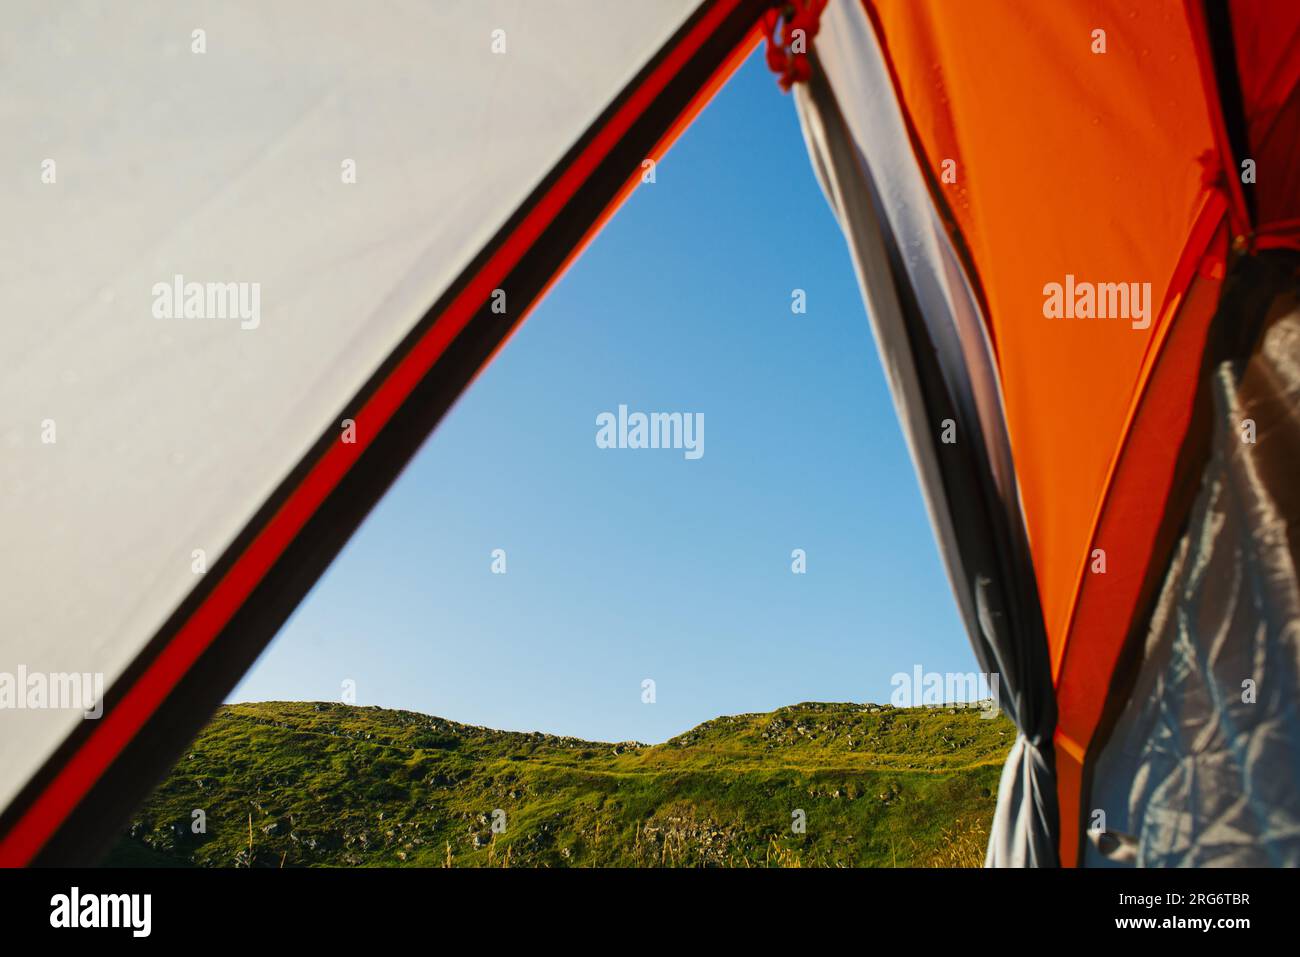 Scenic POV View from tent to mountains, Picturesque View From Orange Tent to the Mountains Carpathian, Outdoors scenes Summer Hiking Adventure Stock Photo